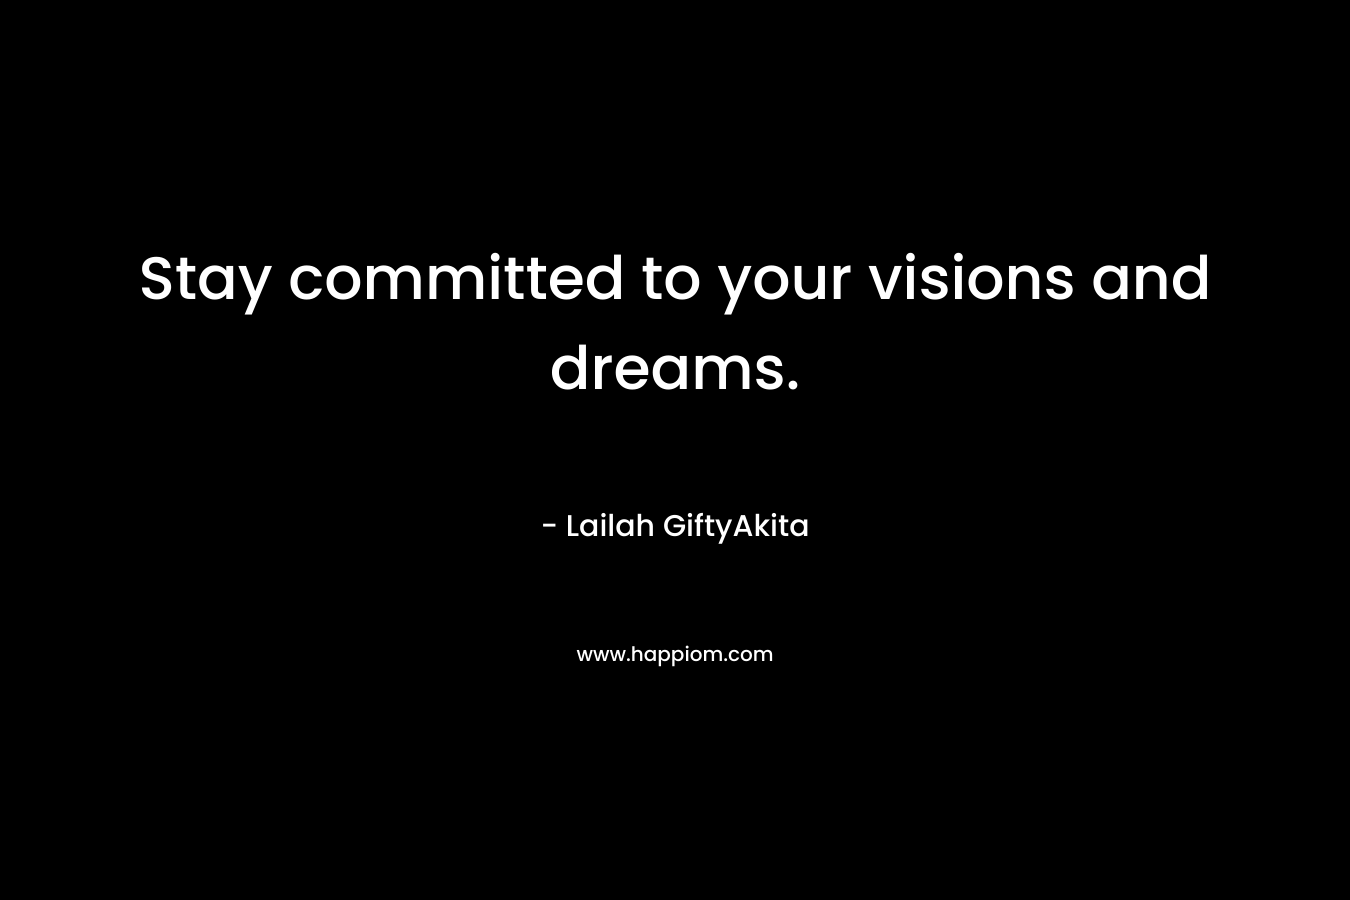 Stay committed to your visions and dreams. – Lailah GiftyAkita